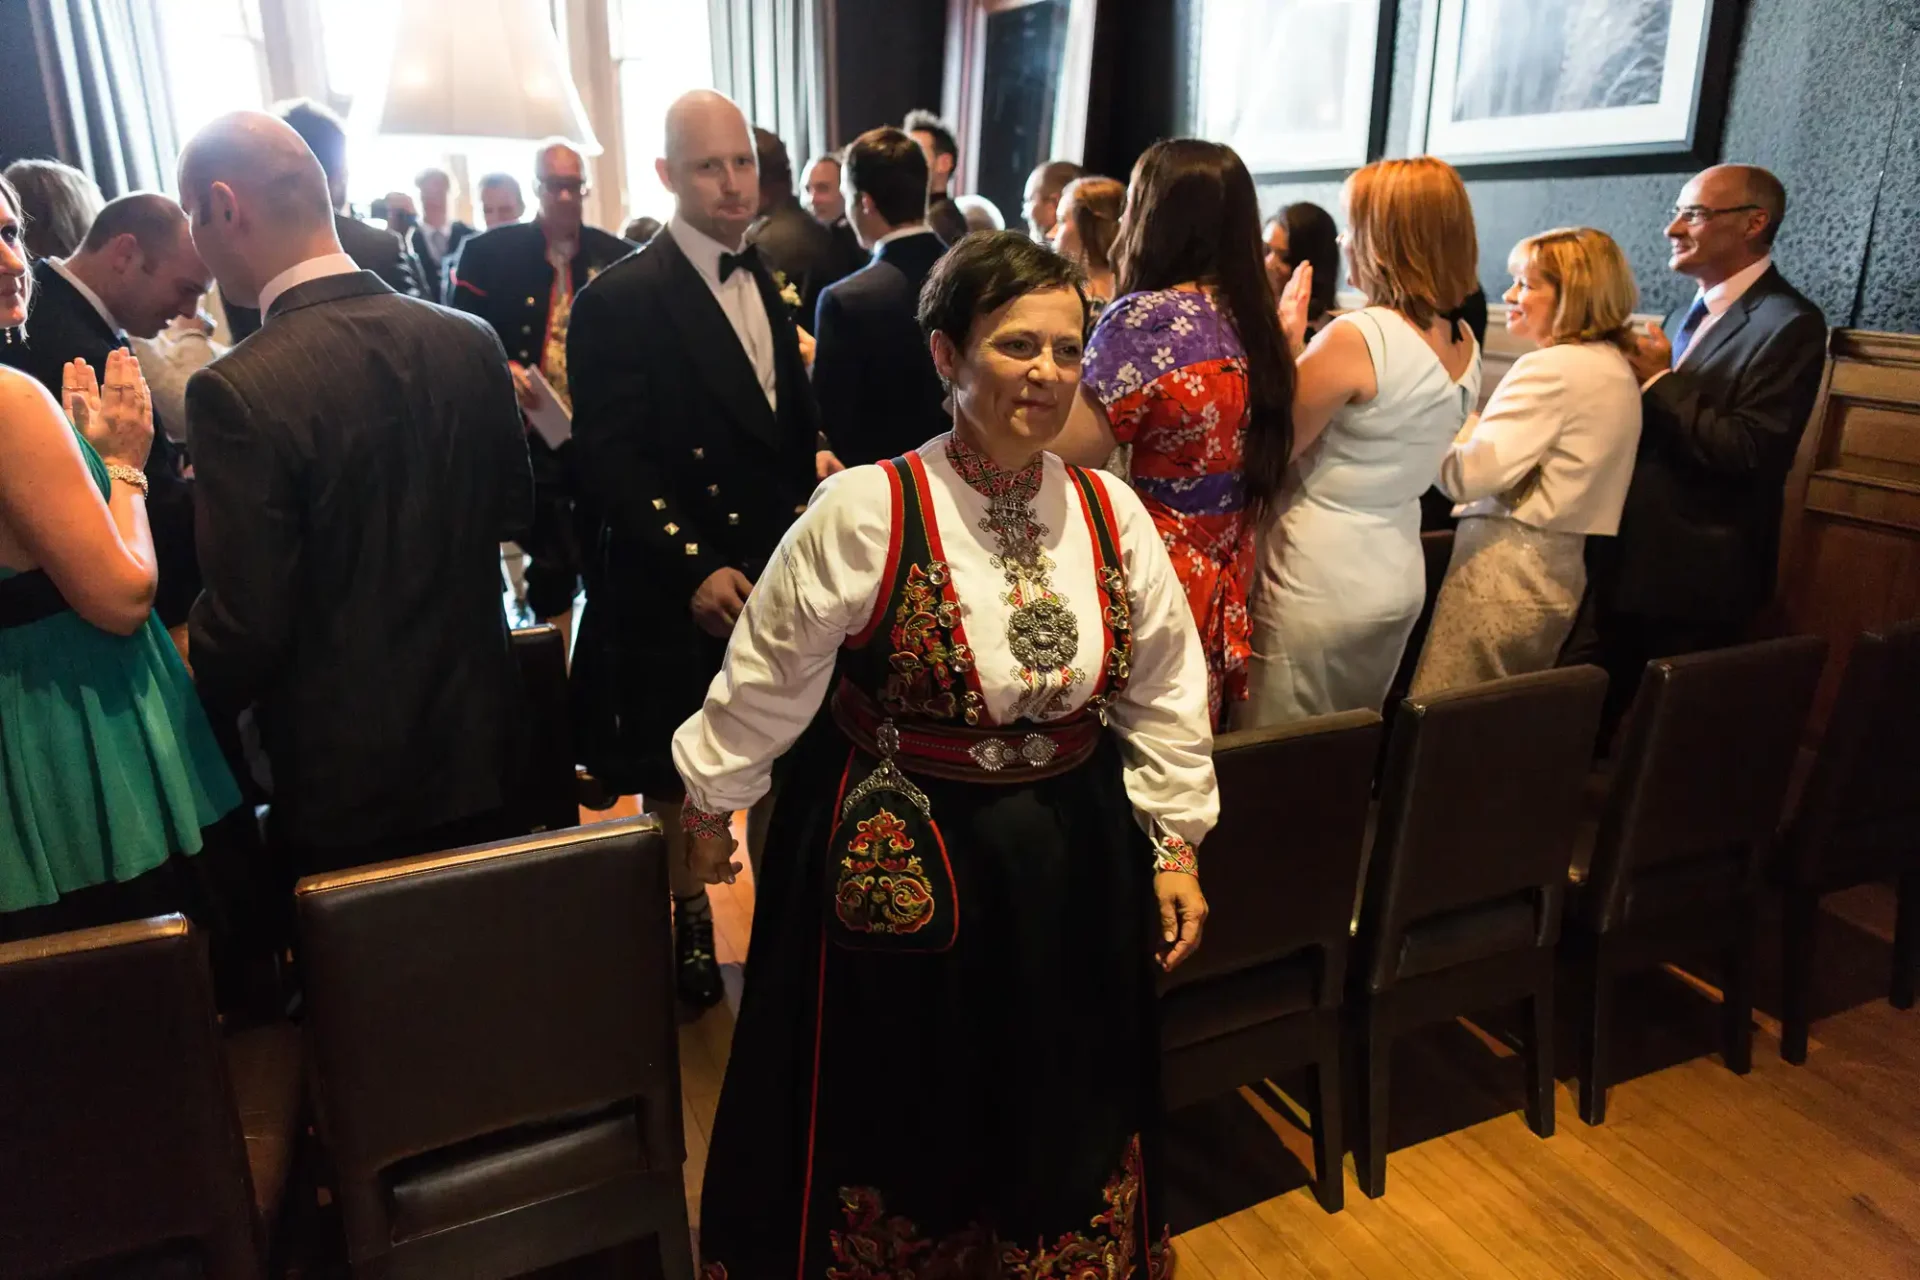 A woman in traditional norwegian dress at a crowded indoor event, smiling as she walks between rows of seated and standing guests.